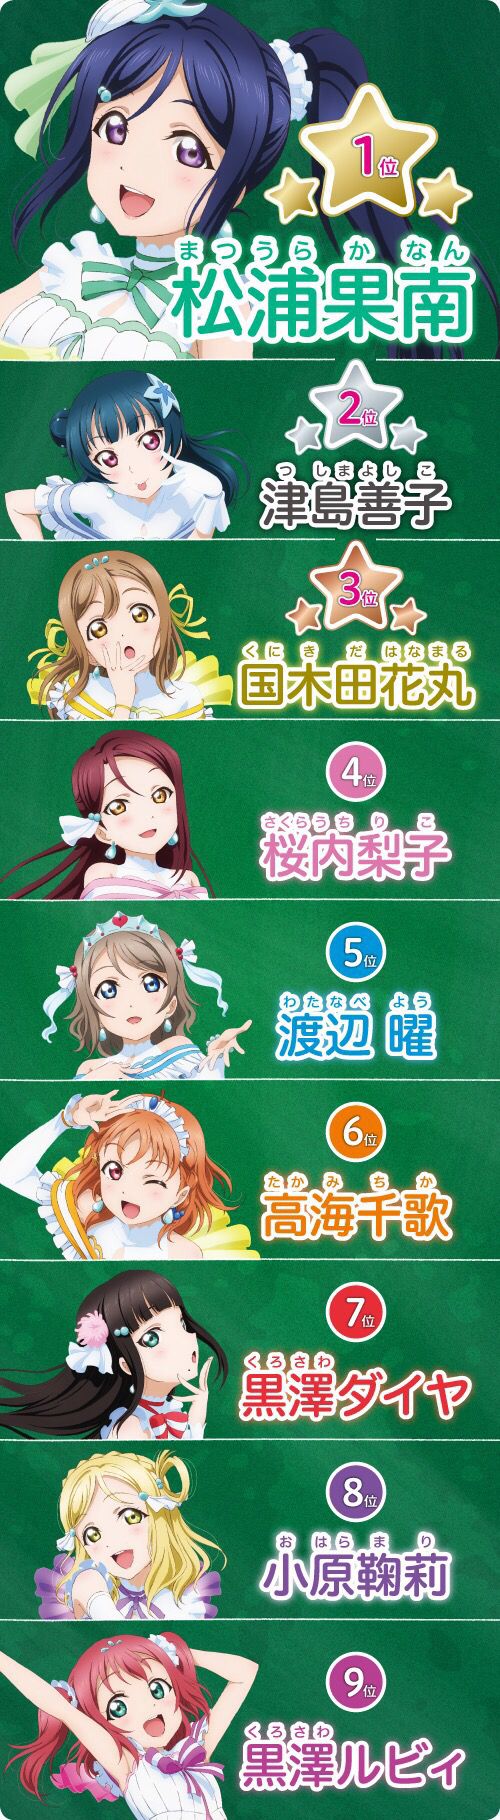 [Image] "love live! Sunshine ' to tell the truth 1-erotic not Matsuura of South's overwhelming body wwwwwwww 50